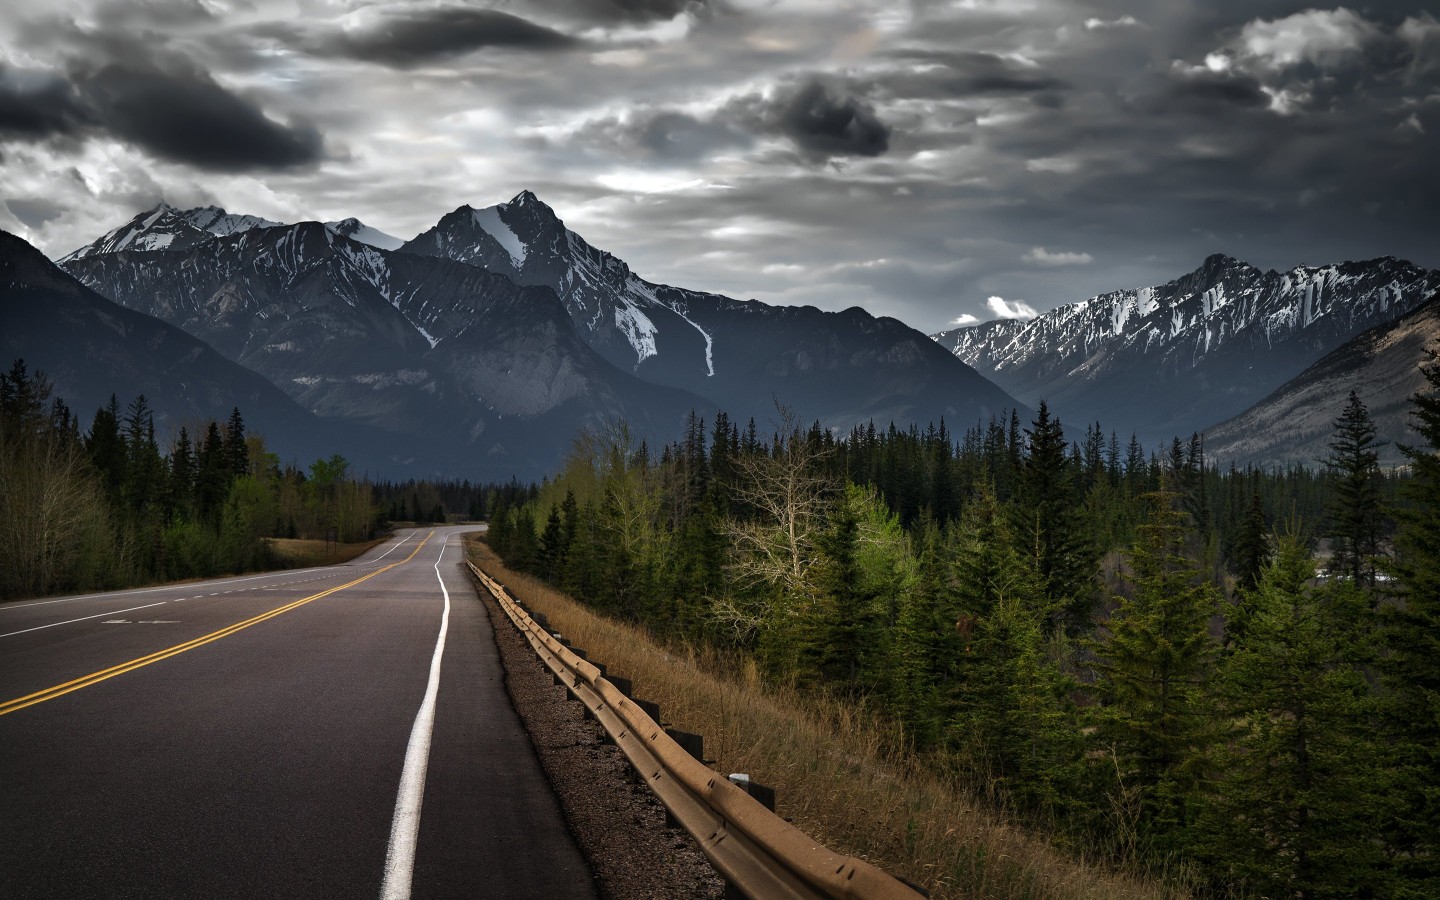 Road trip on a stormy day, Canada Wallpaper for Desktop 1440x900